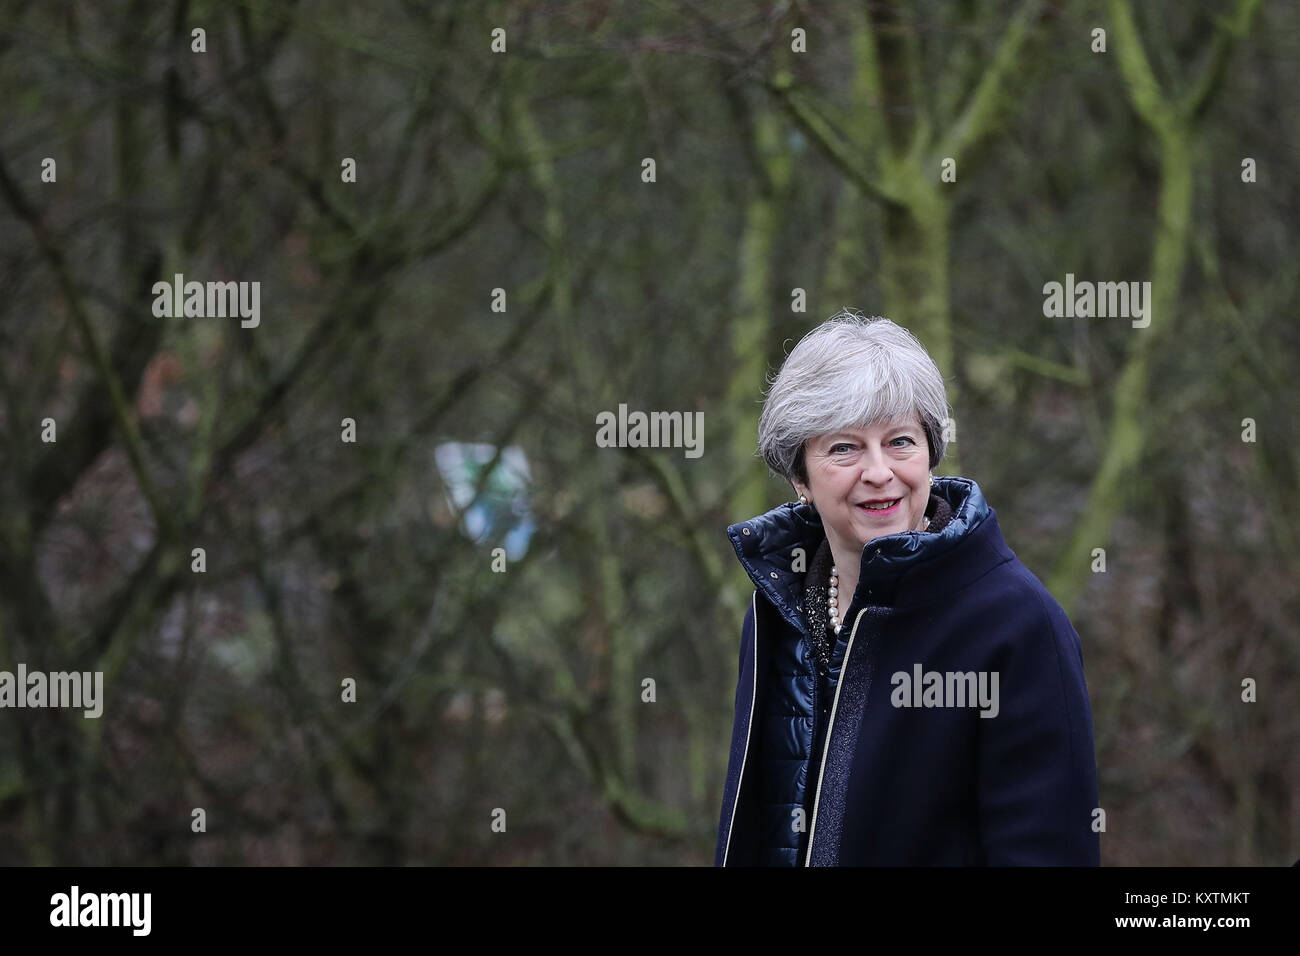 Prime Minister Theresa May walks through the grounds of the Wildfowl and Wetland Trust ahead of a speech where she set out her vision for protecting the environment. Stock Photo